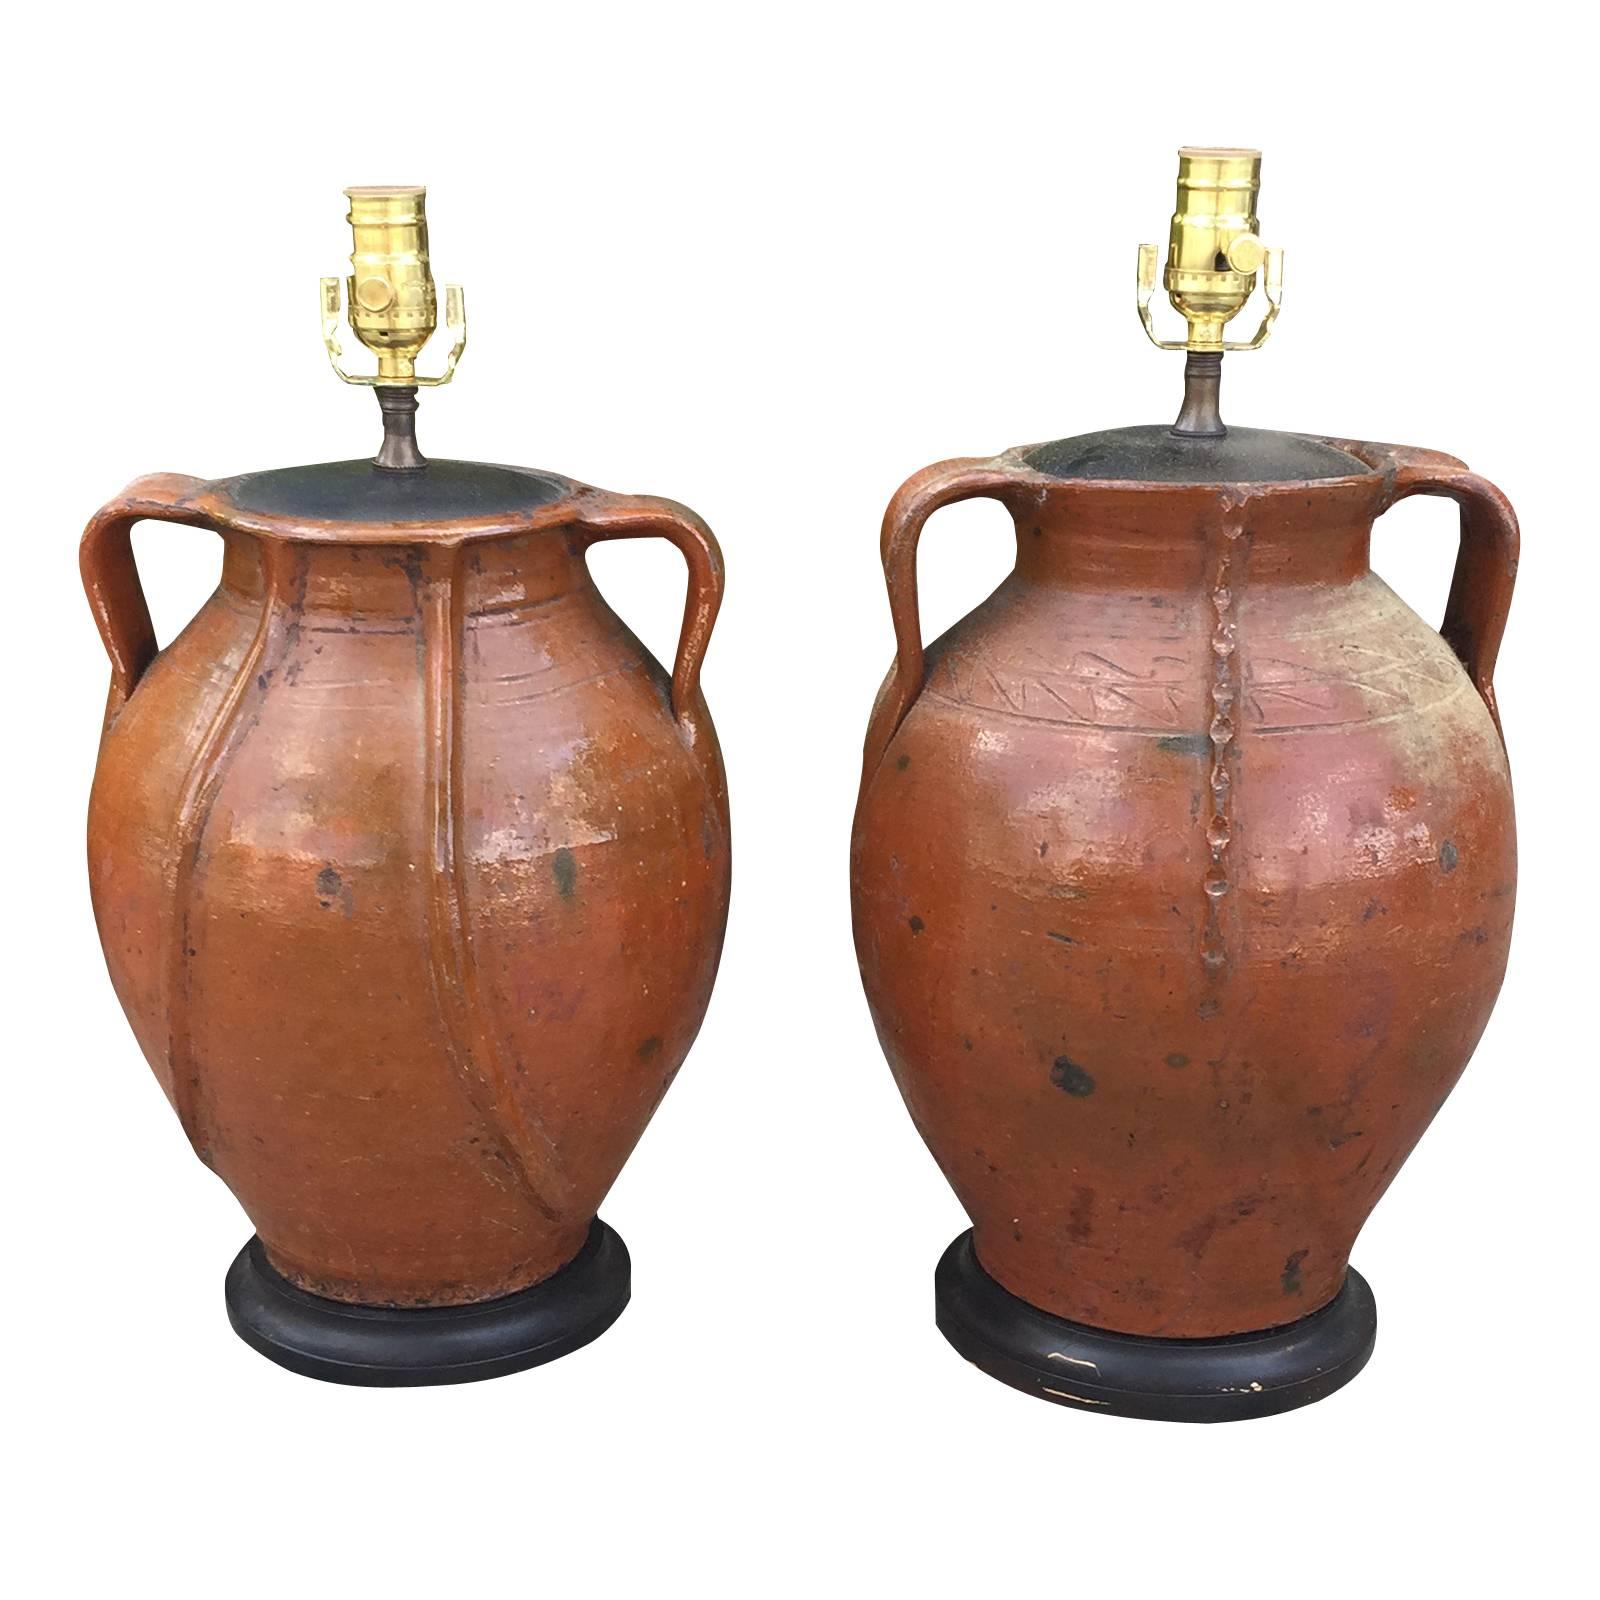 19th-20th Century Two Similar French Pottery Urns as Lamps